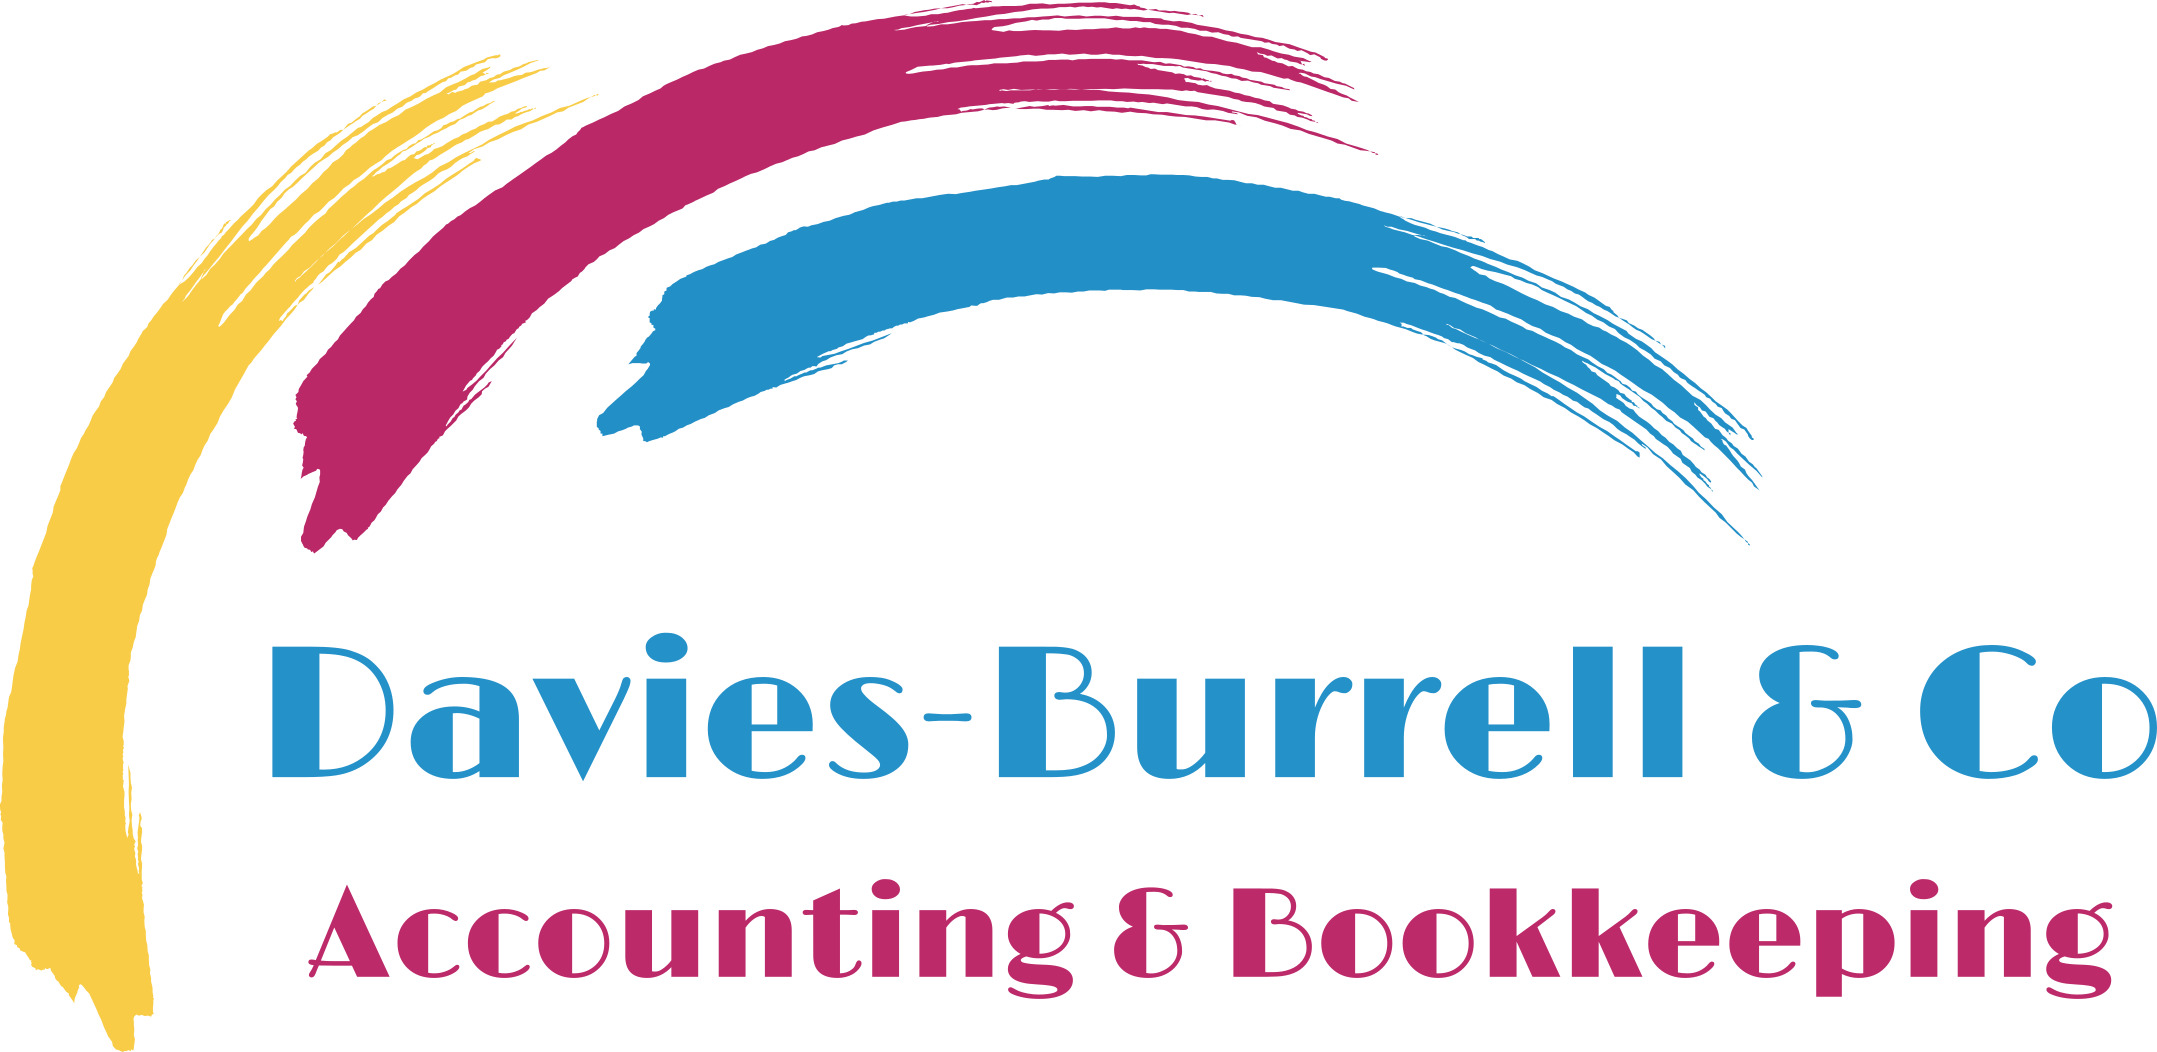 Davies Burrel & Co Accounting and Bookkeeping logo